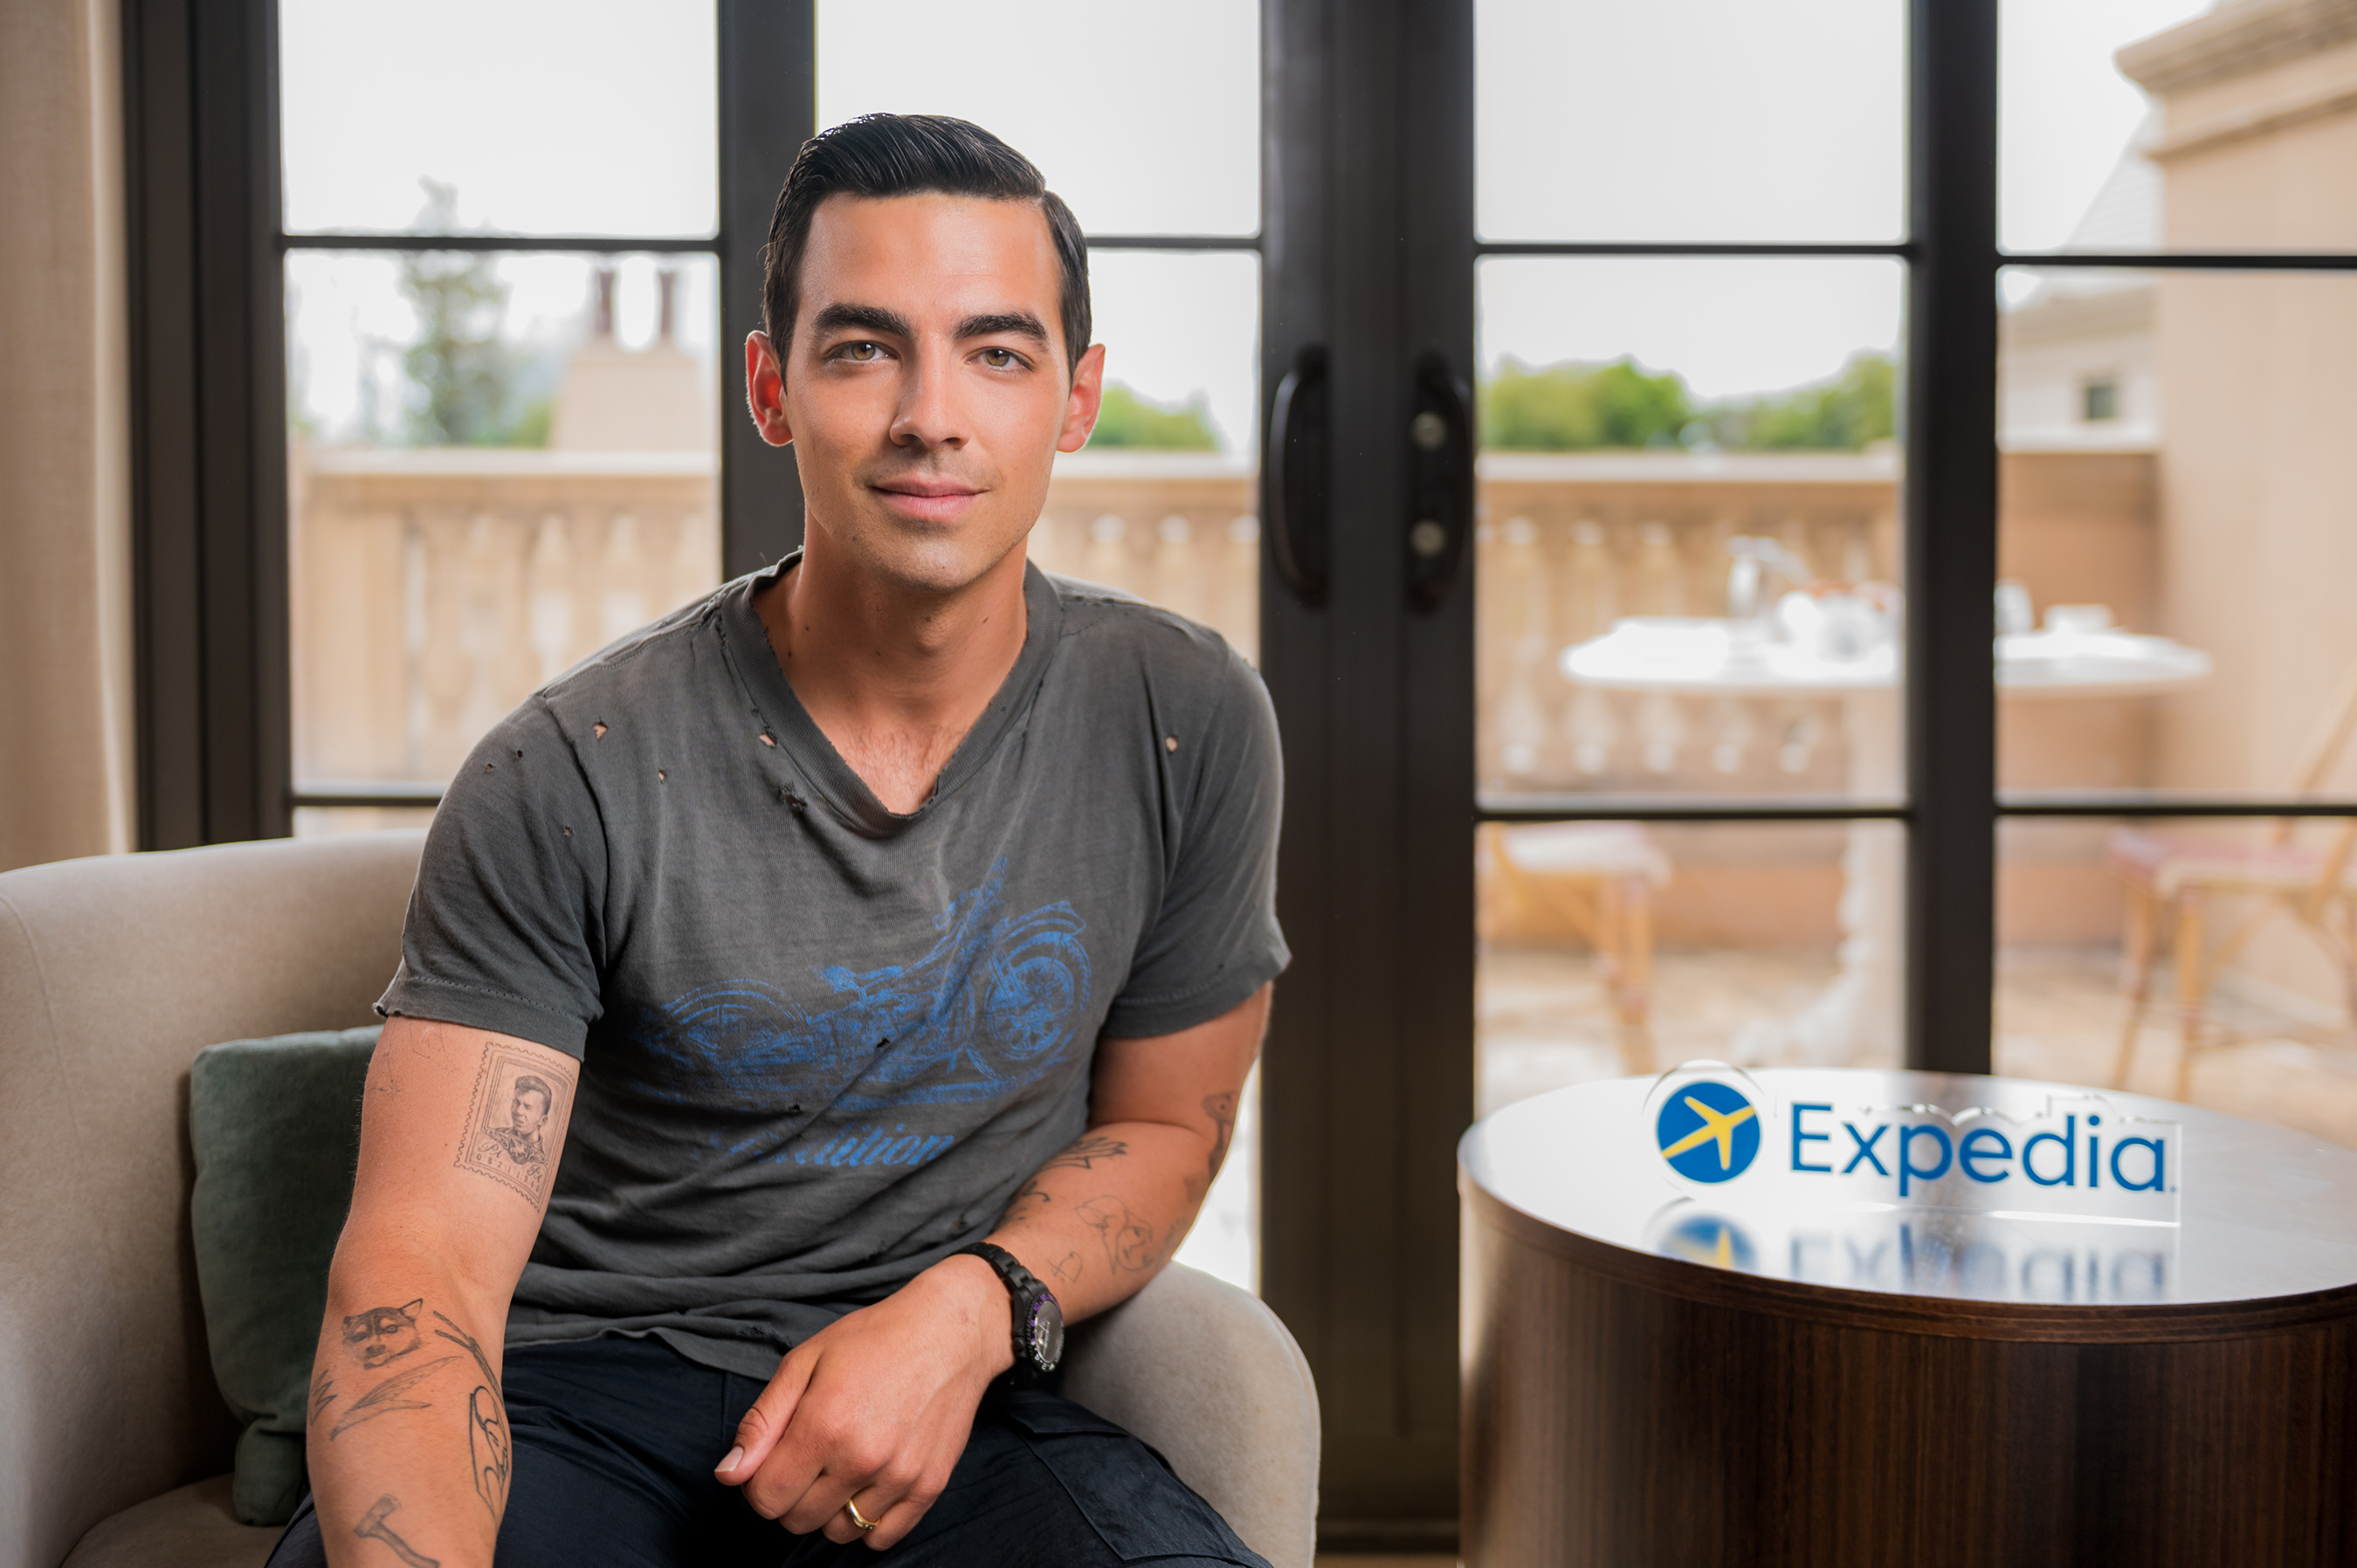 Joe Jonas pictured on site with Expedia for an exciting project that will support travelers as they prepare to travel again